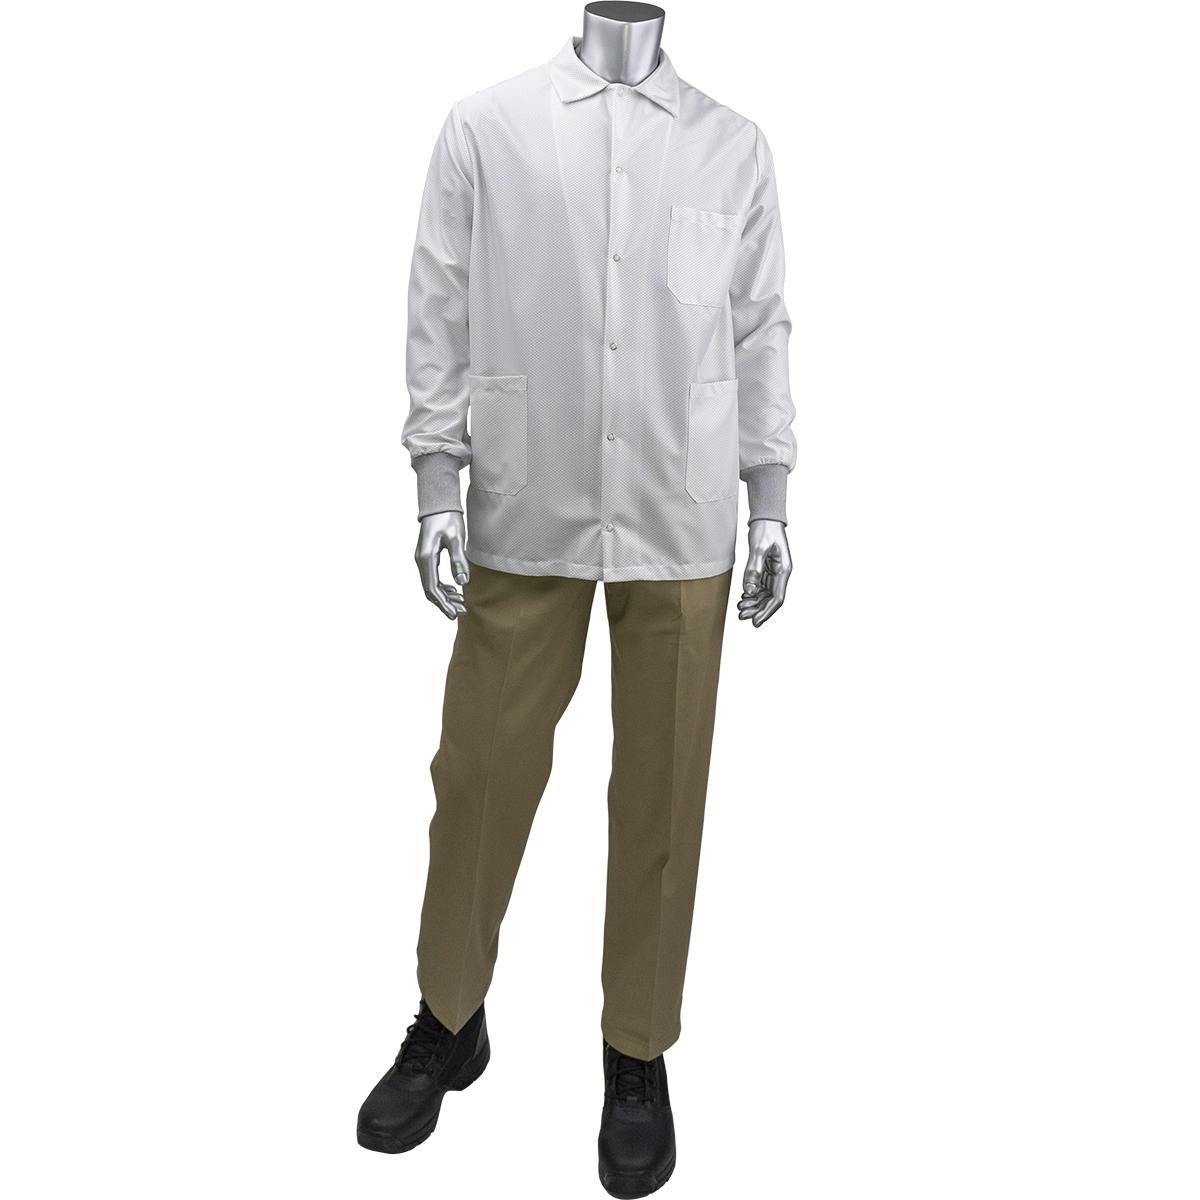 StatMaster Short ESD Labcoat - ESD Knit Cuff, White (BR49AC-47WH)